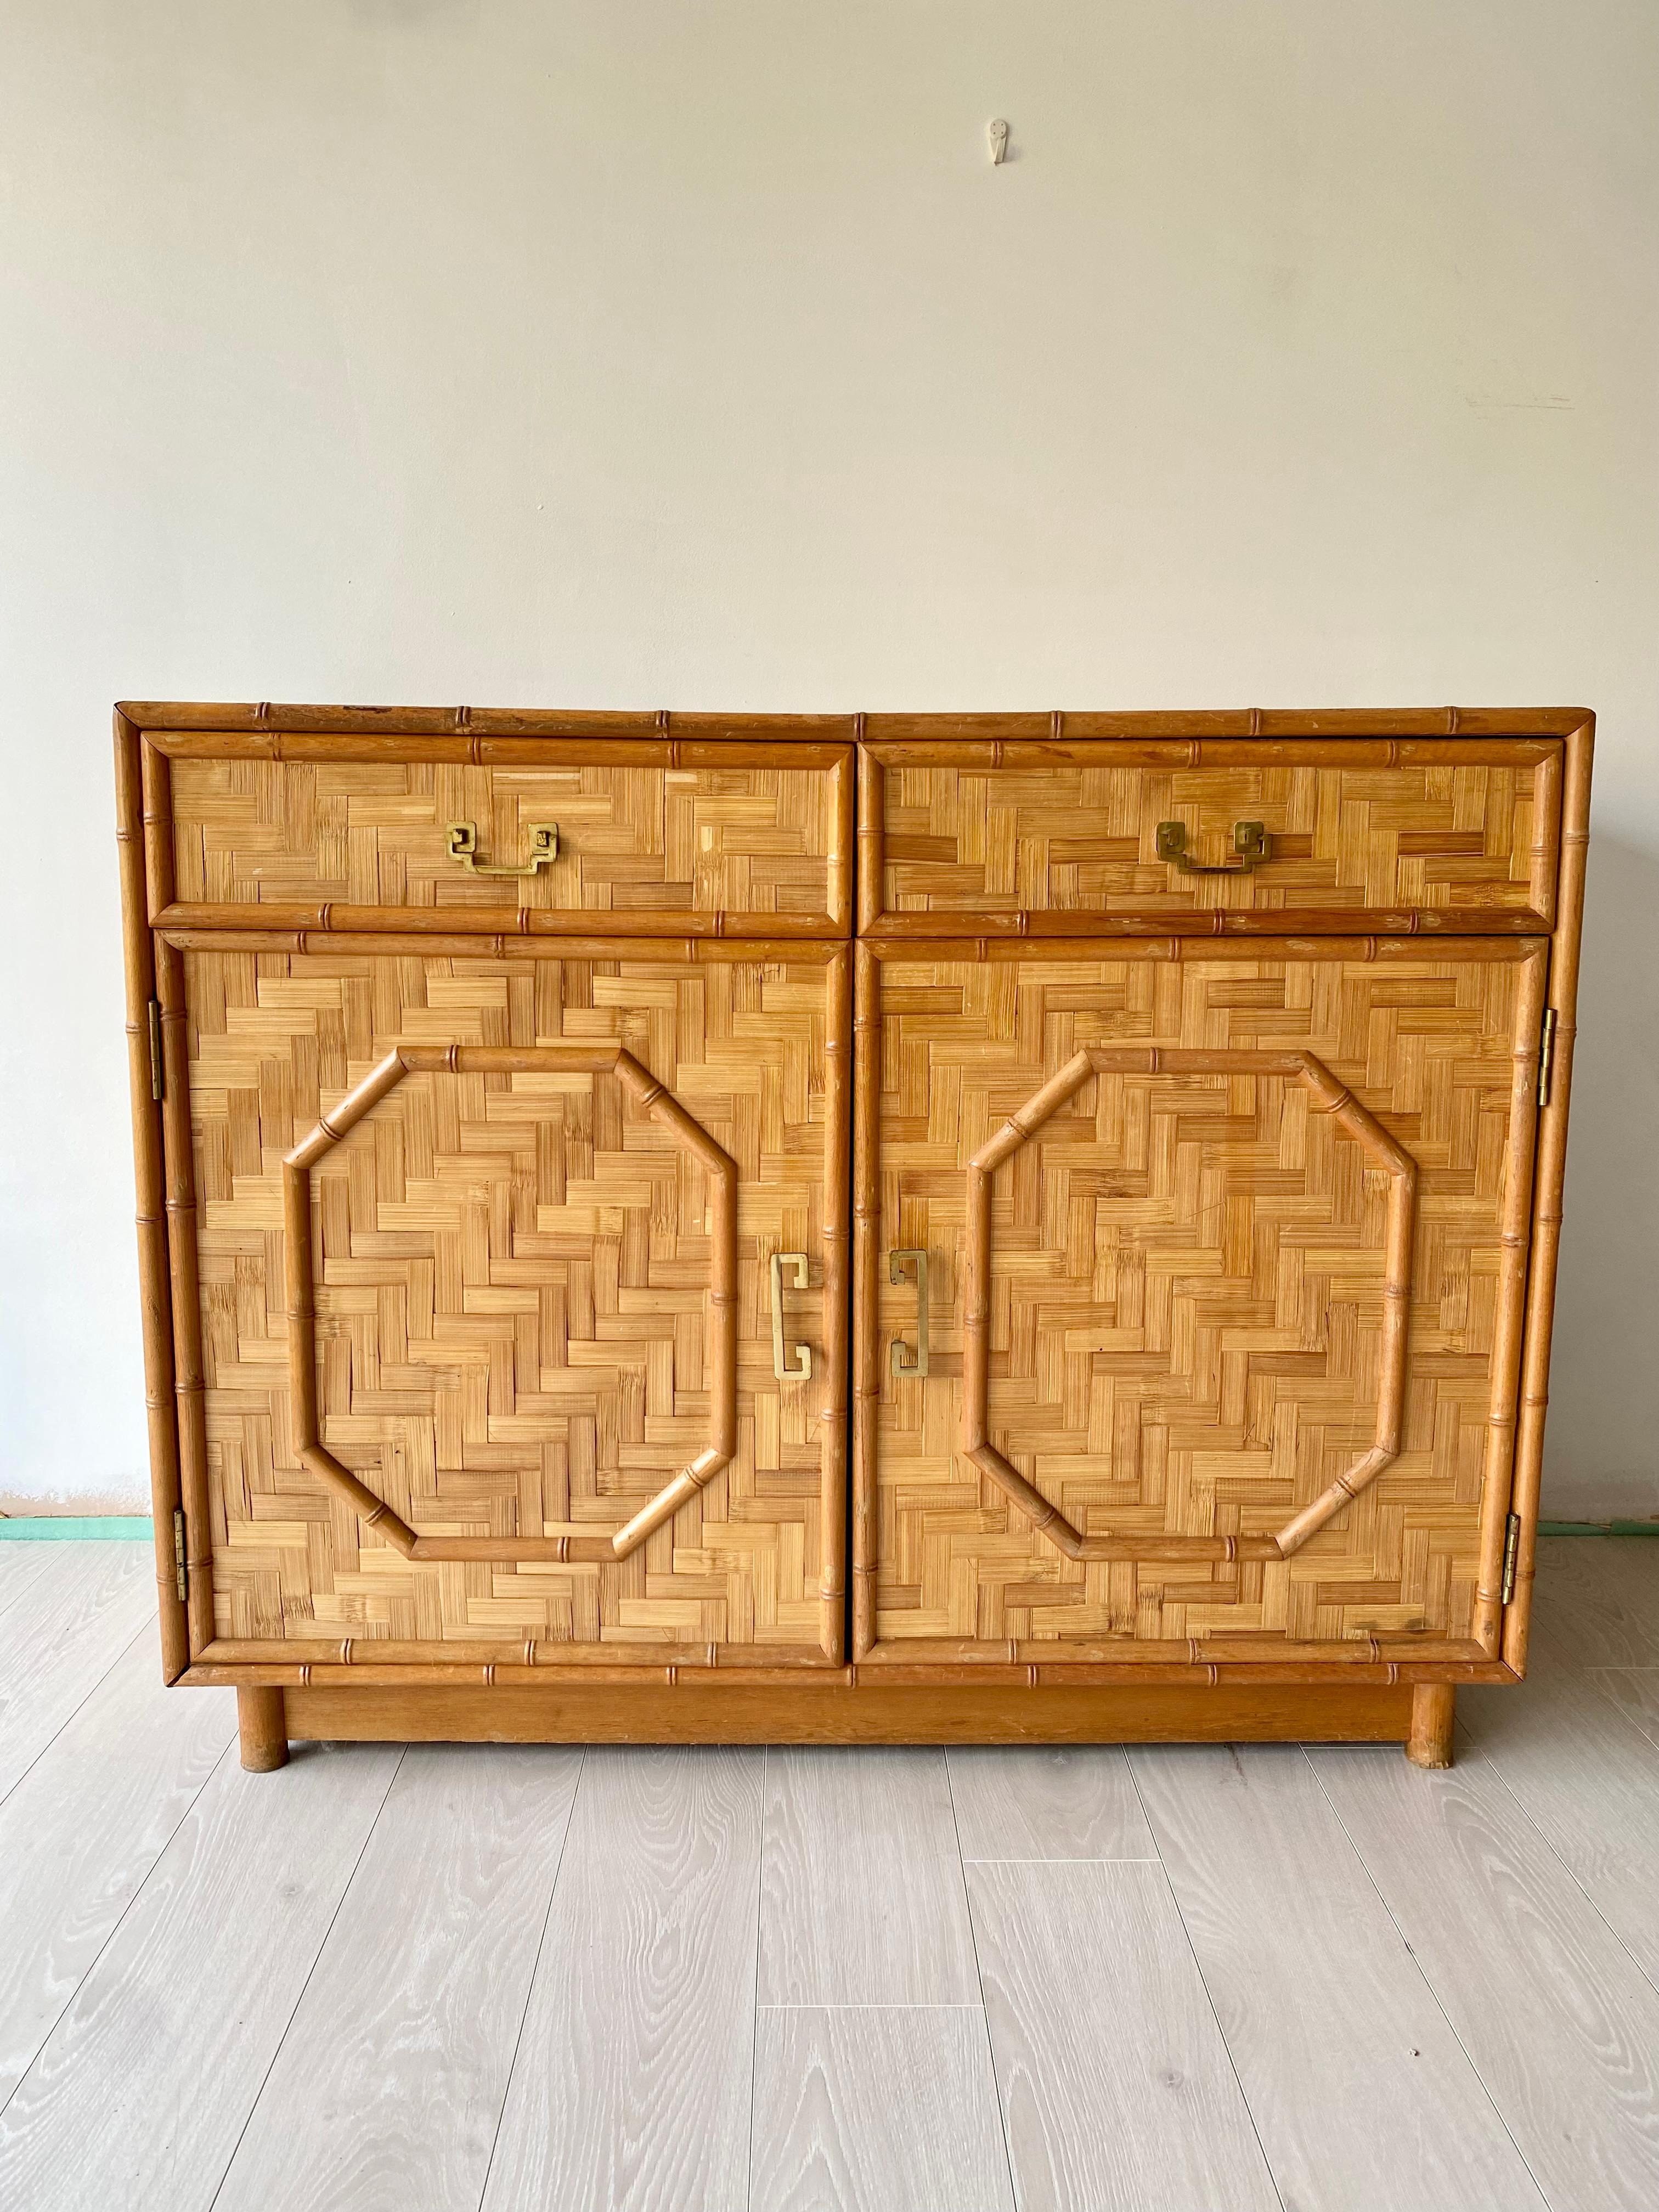 A stunning mid century rattan and bamboo sideboard

In good vintage condition with aged brass handles

Slight discolouration to the top as per close up images

Measures: 114cm wide, 47cm deep, 90cm tall.
 